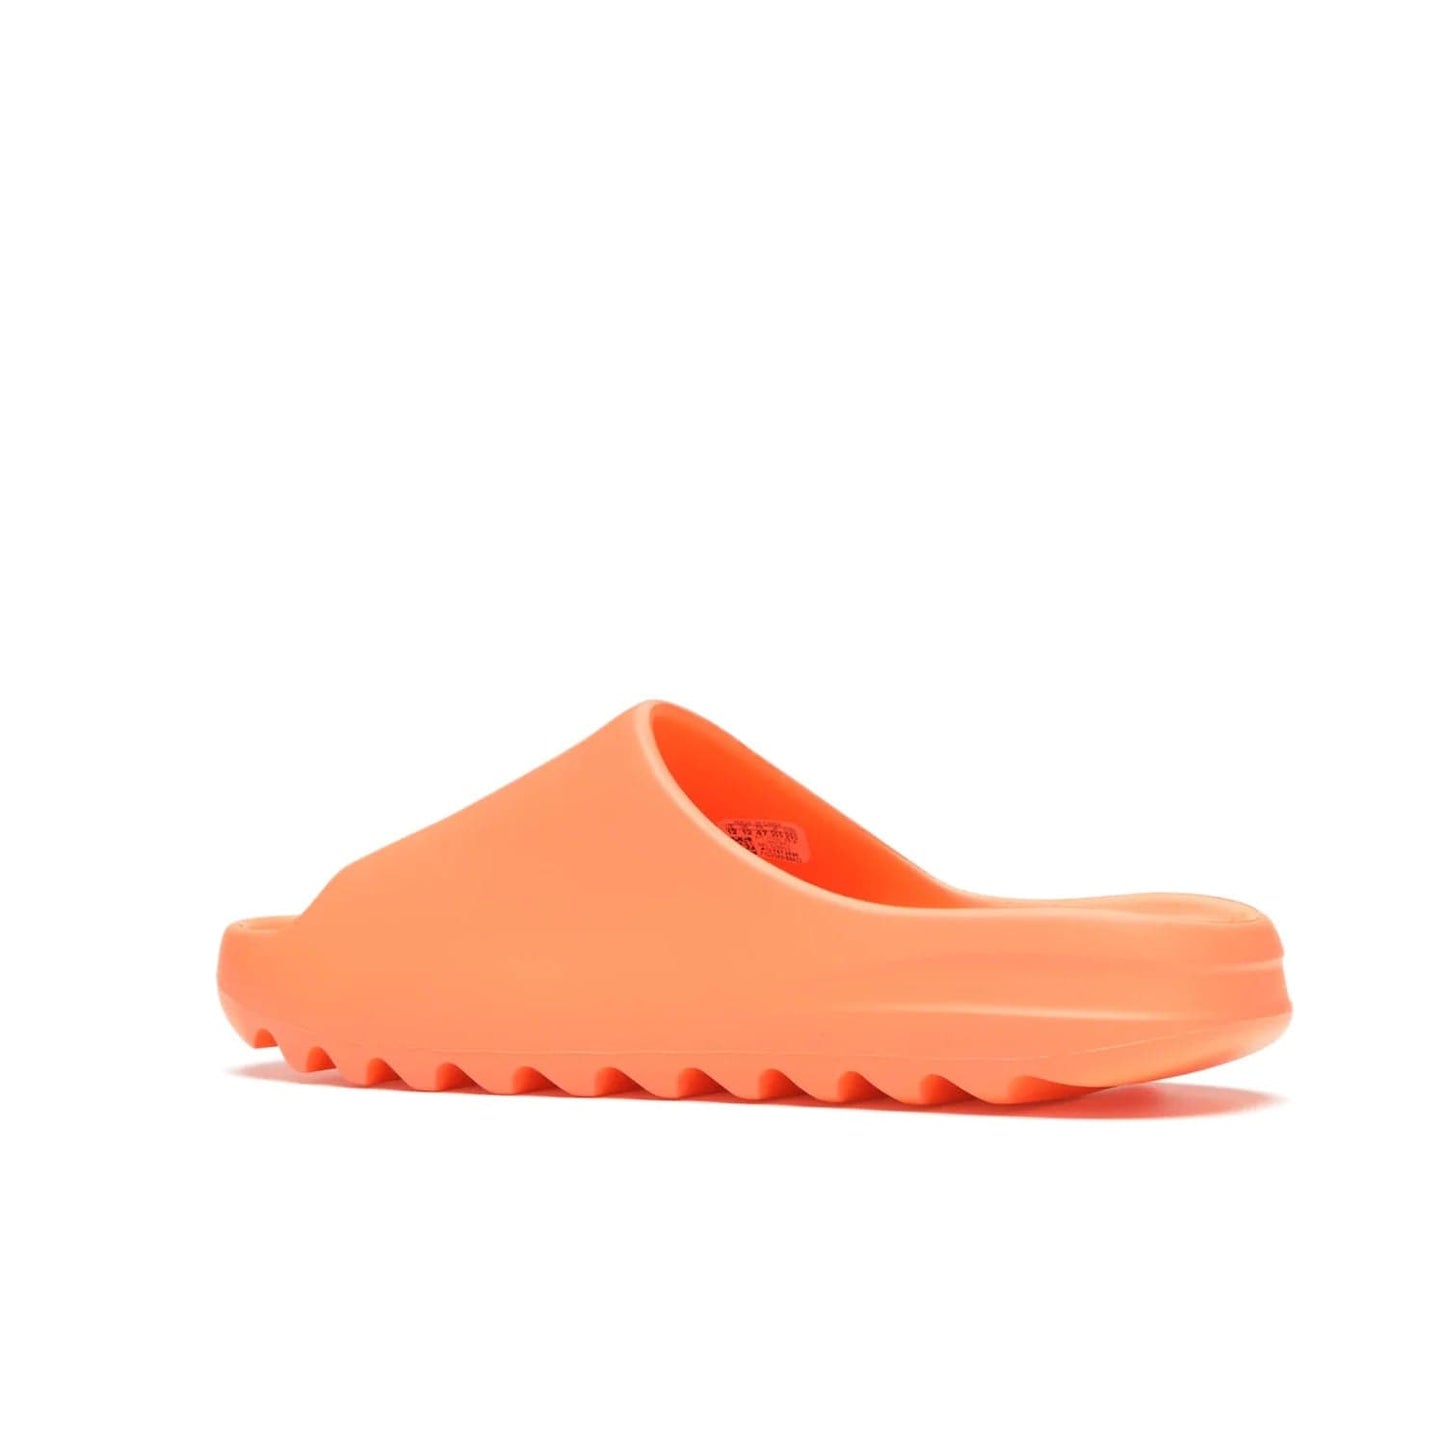 adidas Yeezy Slide Enflame Orange - Image 22 - Only at www.BallersClubKickz.com - Limited edition adidas Yeezy Slide featuring a bold Enflame Orange upper and EVA foam construction. Grooved outsole for traction and support. Released June 2021. Perfect for summer.